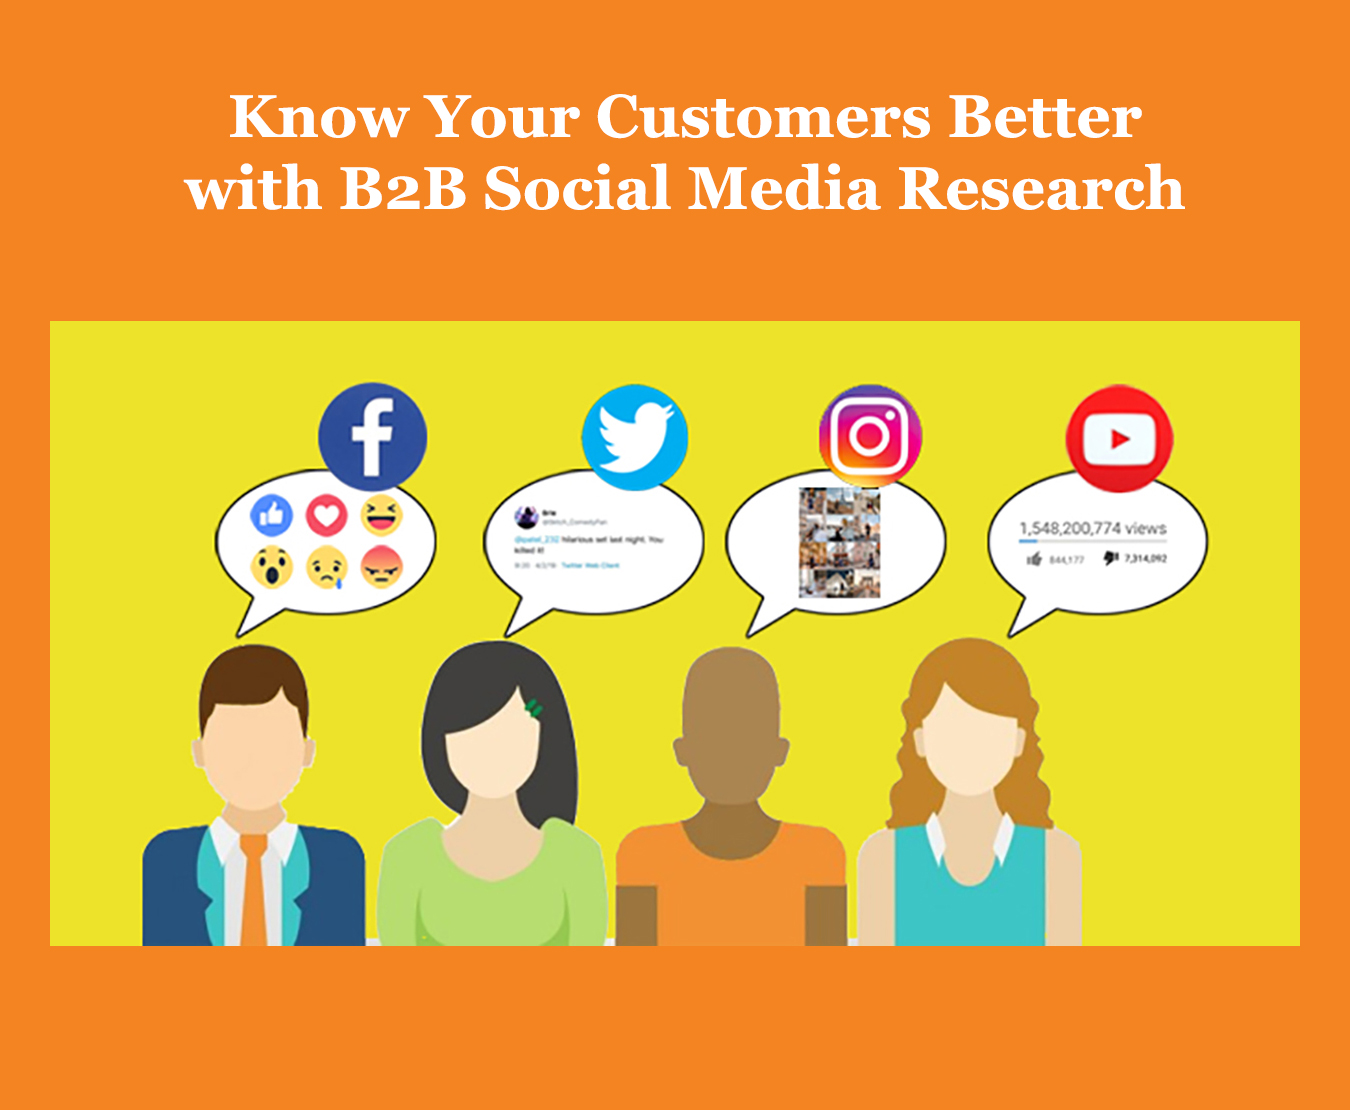 B2B social media research benefits companies wanting to know their customers better